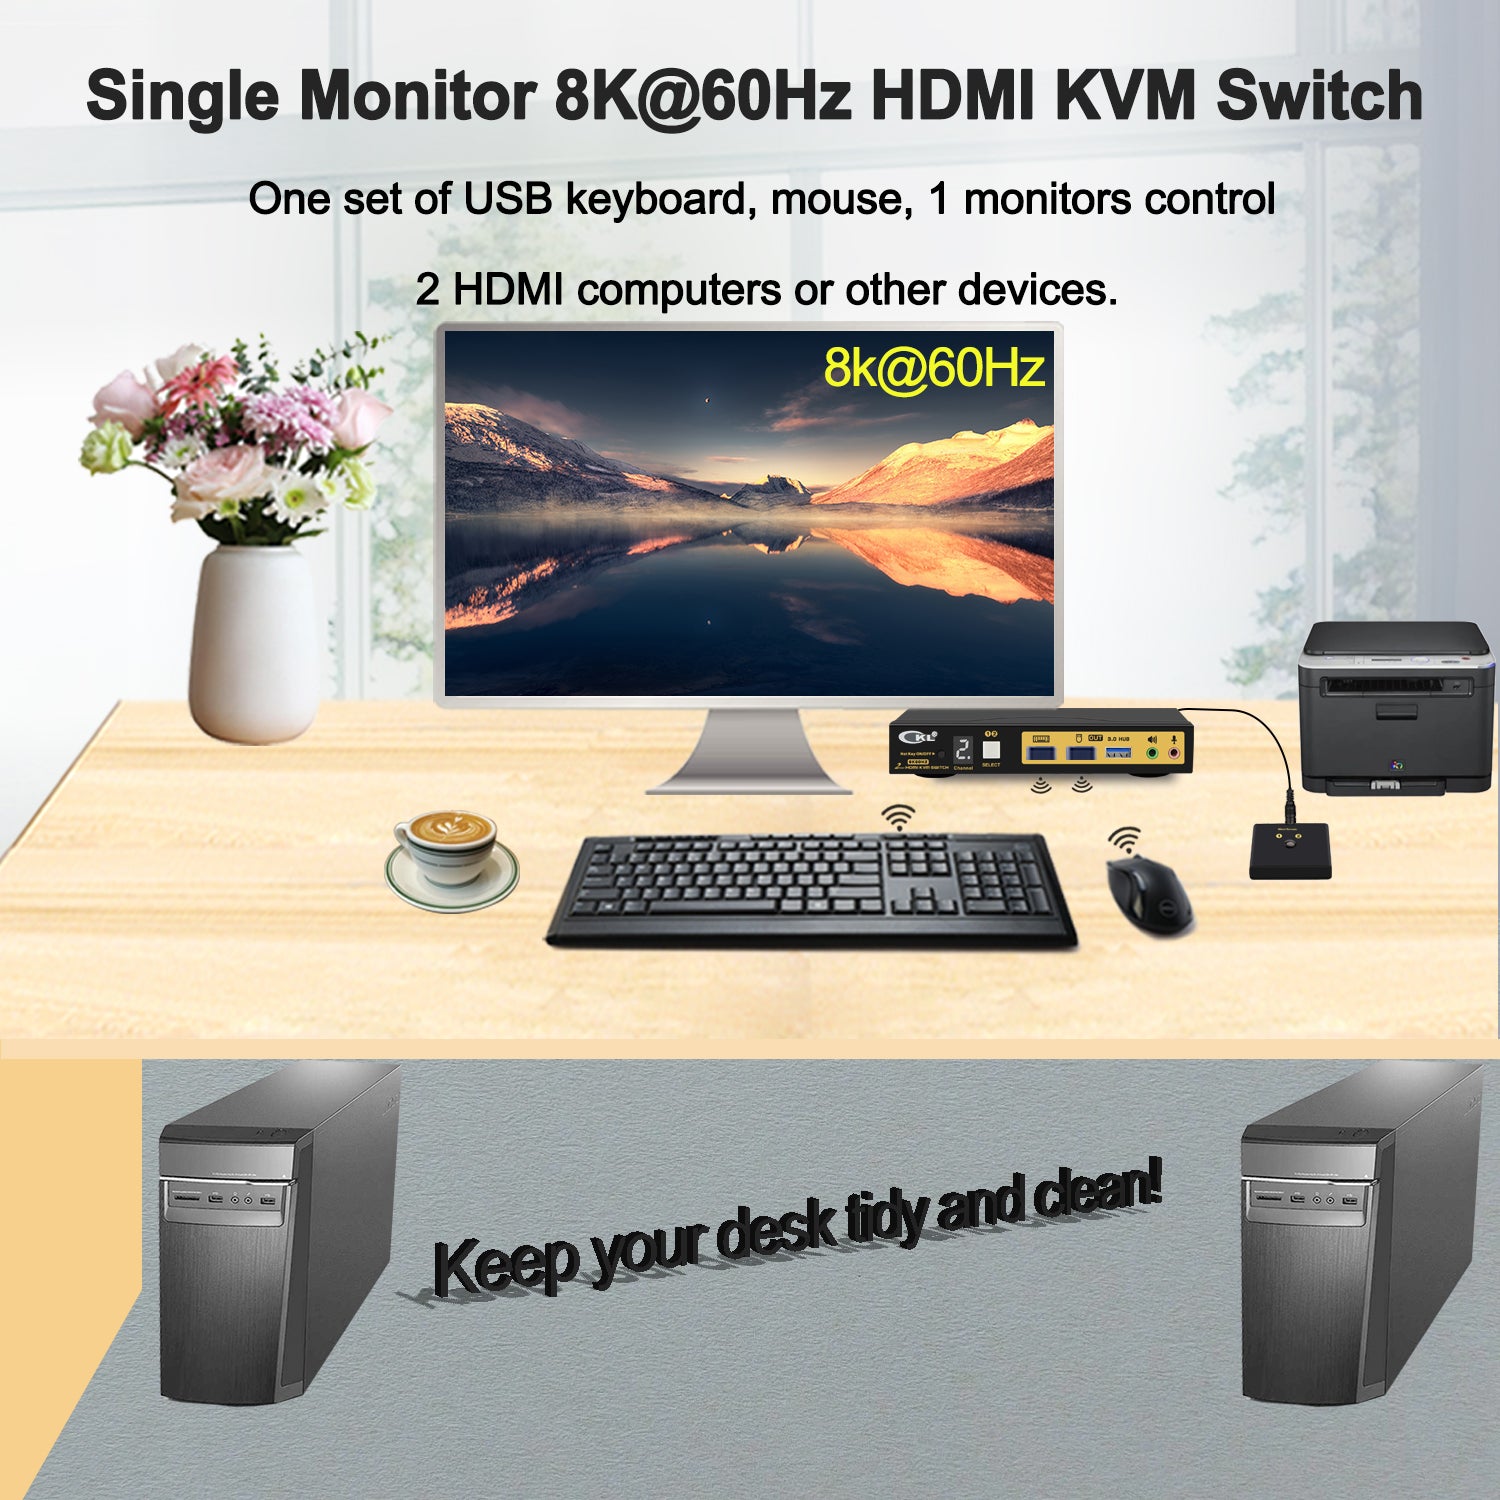 CKL 2 Port USB 3.0 KVM Switch HDMI 2.1 8K 60Hz 4K 120Hz 144Hz with EDID, PC Screen Keyboard Mouse Peripheral Audio Sharing Selector Box for 2 Computers 1 Monitor (62HUA-5)